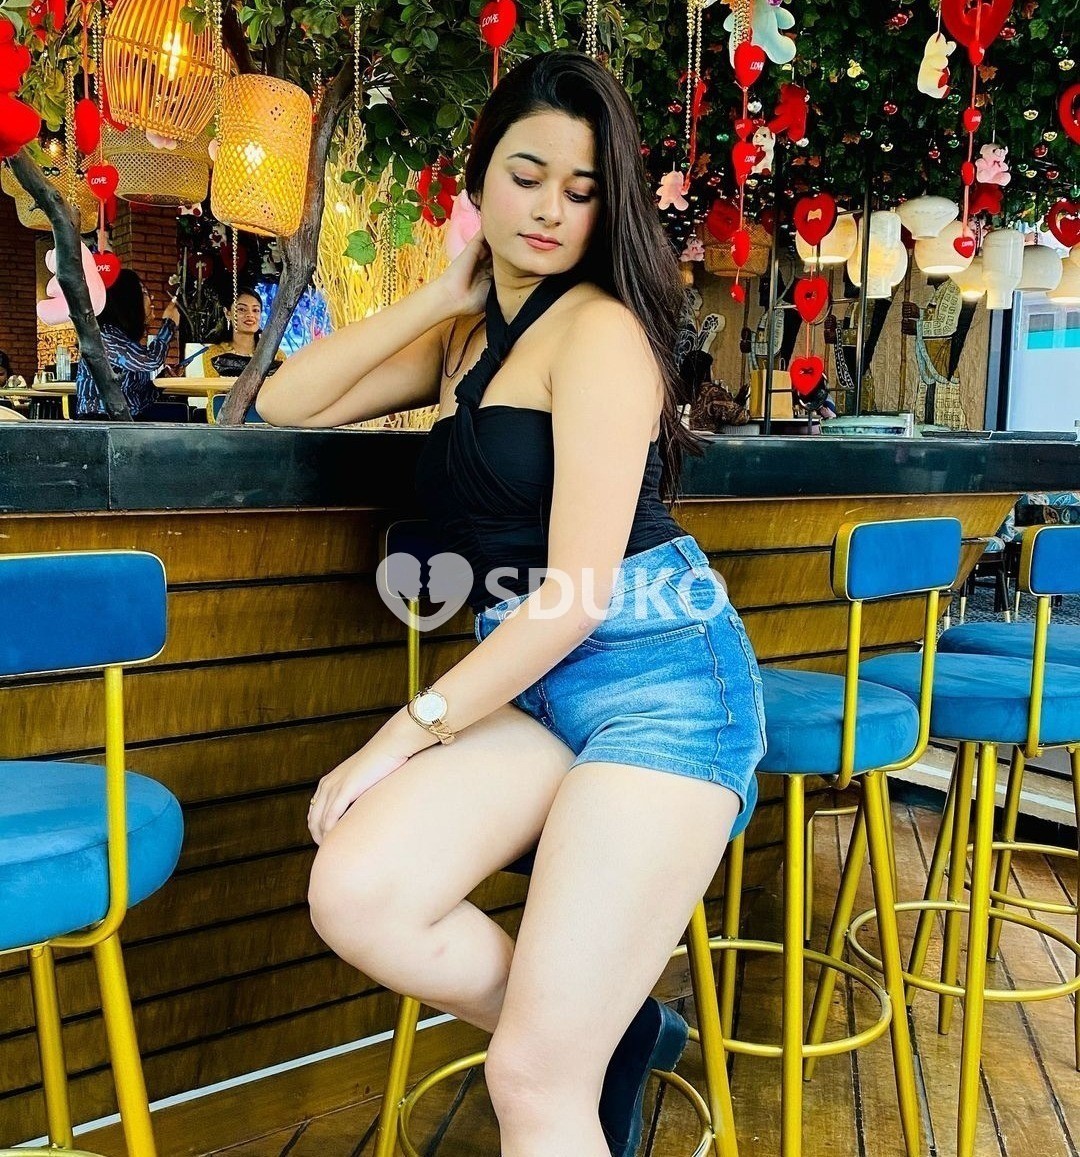 Nagpur🏪 Low price 100% genuine 👥 sexy VIP call girls are provided👌safe and secure service .call 📞,,24 hours 